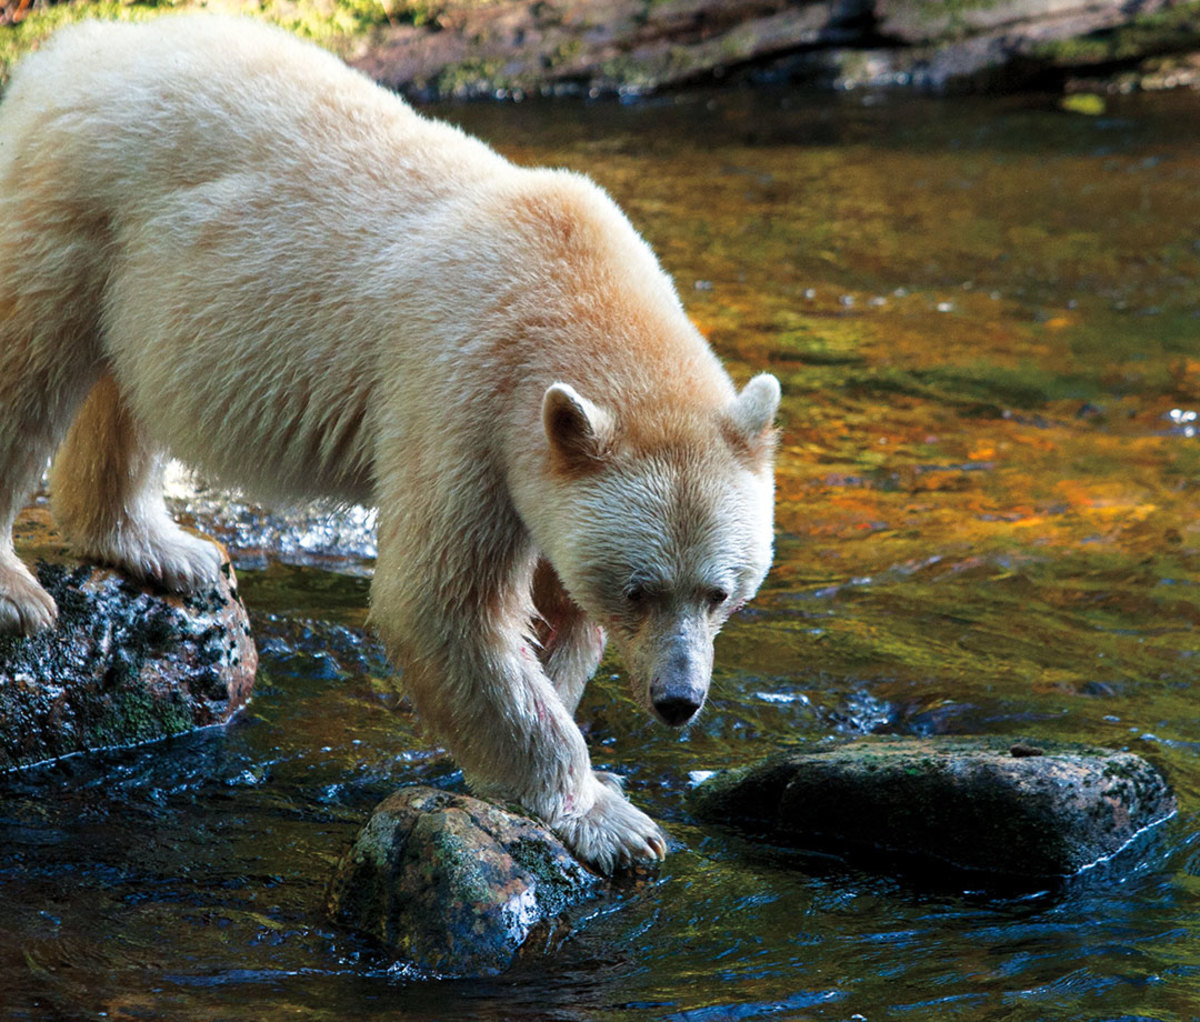 White-furred bear known as a spirit bear at water's edge